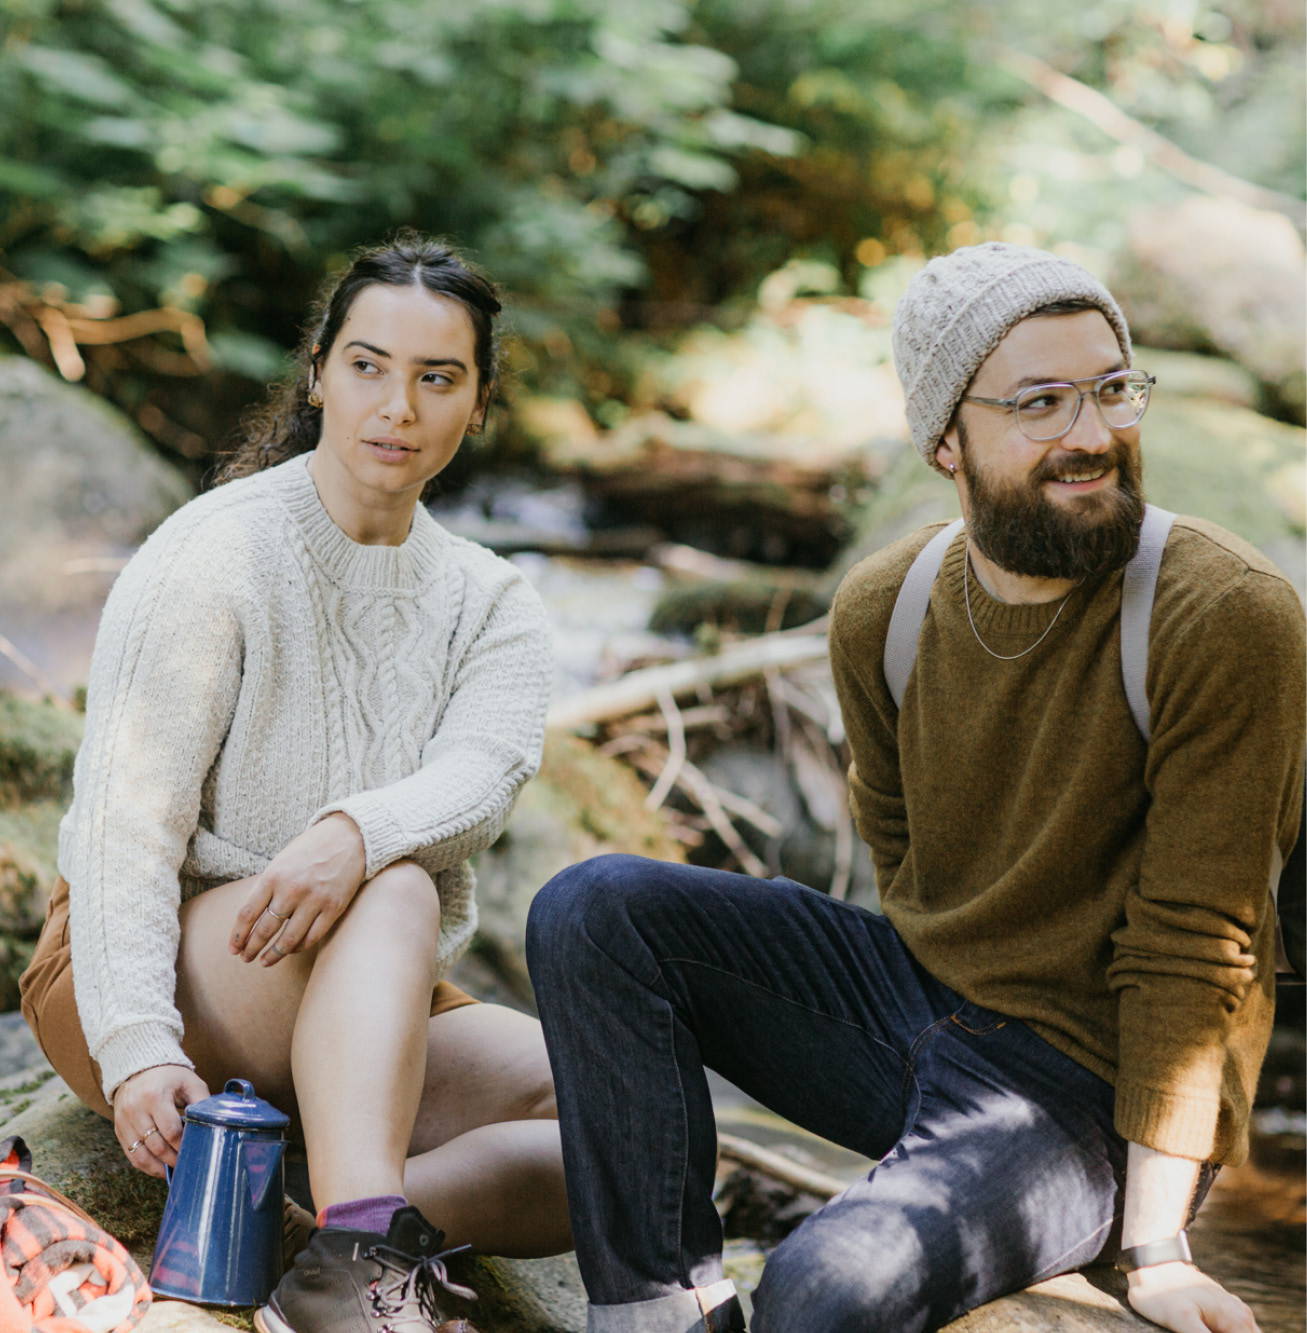 A male and a female model sitting next to each other on large river rocks in the forest.